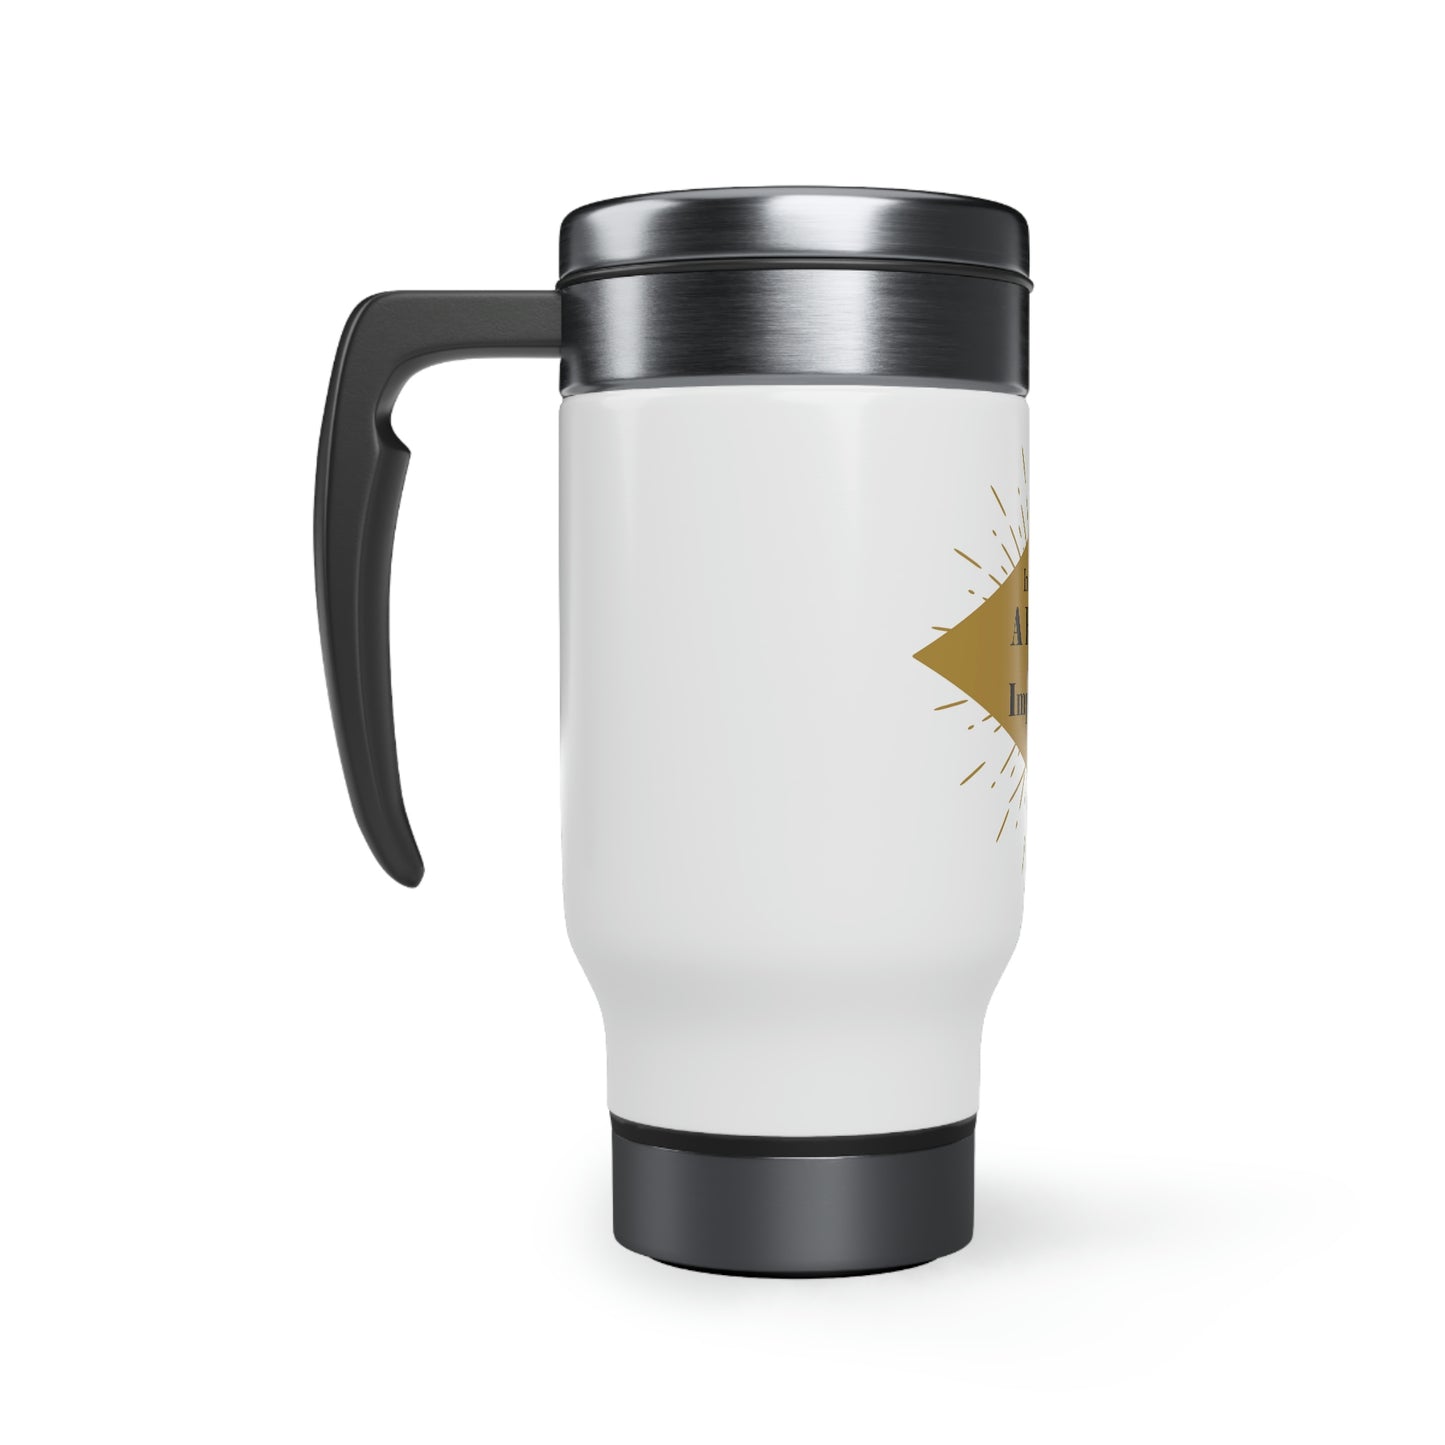 In Christ I Am A Realized Impossibility Travel Mug with Handle, 14oz